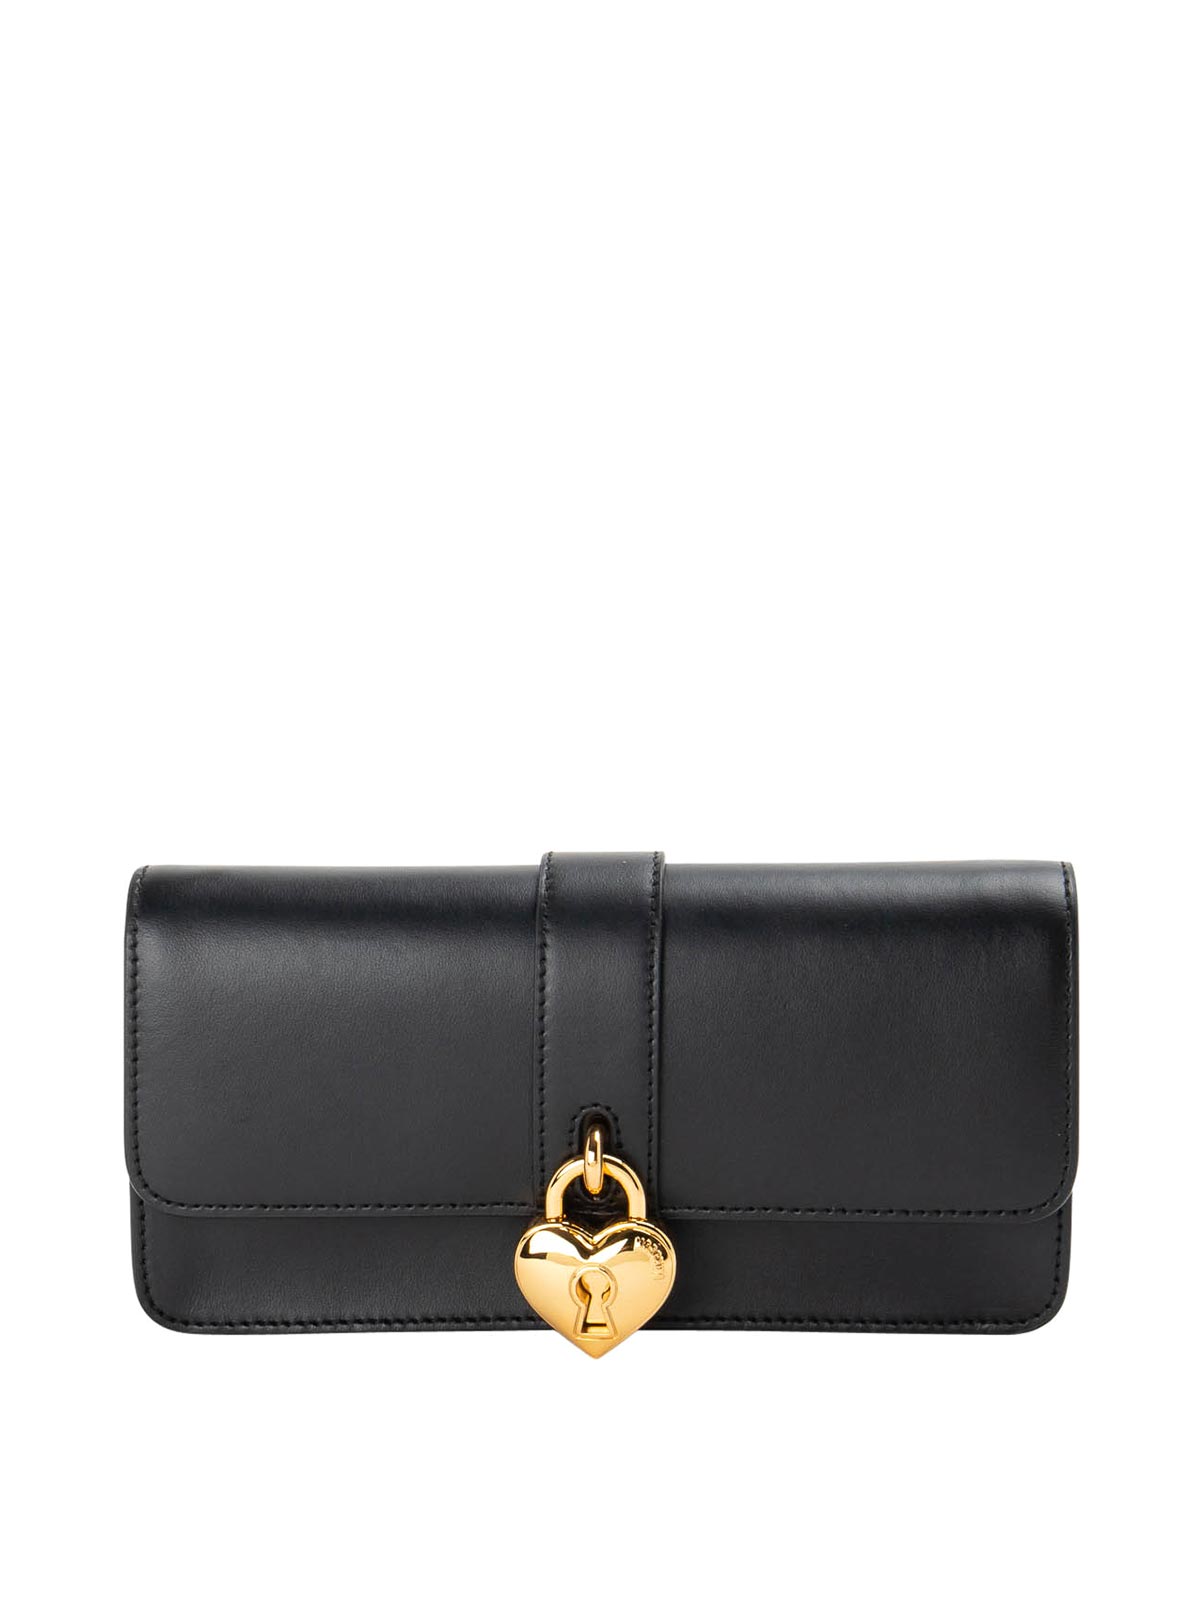 Moschino Leather Clutch In Black